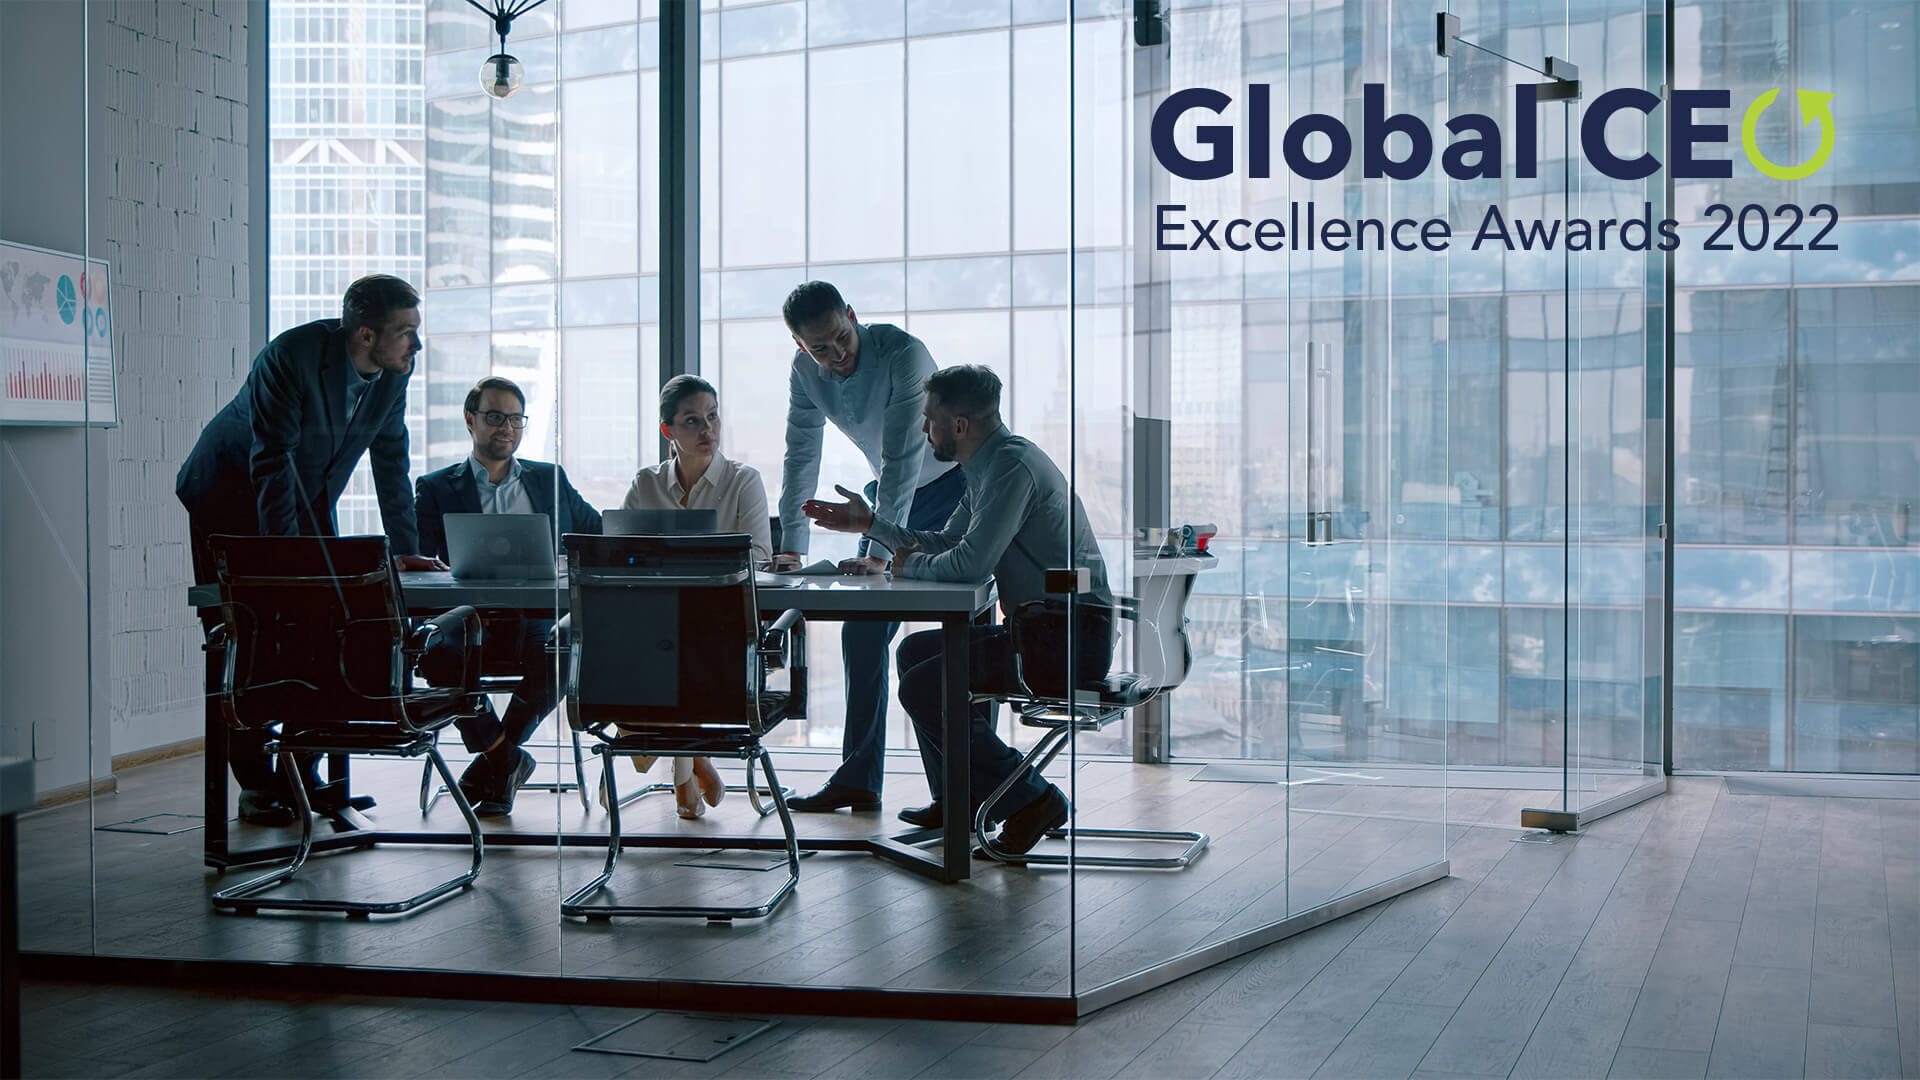 CEO in a meeting. The CEO Monthly Global CEO Excellence Awards logo is in the top right corner